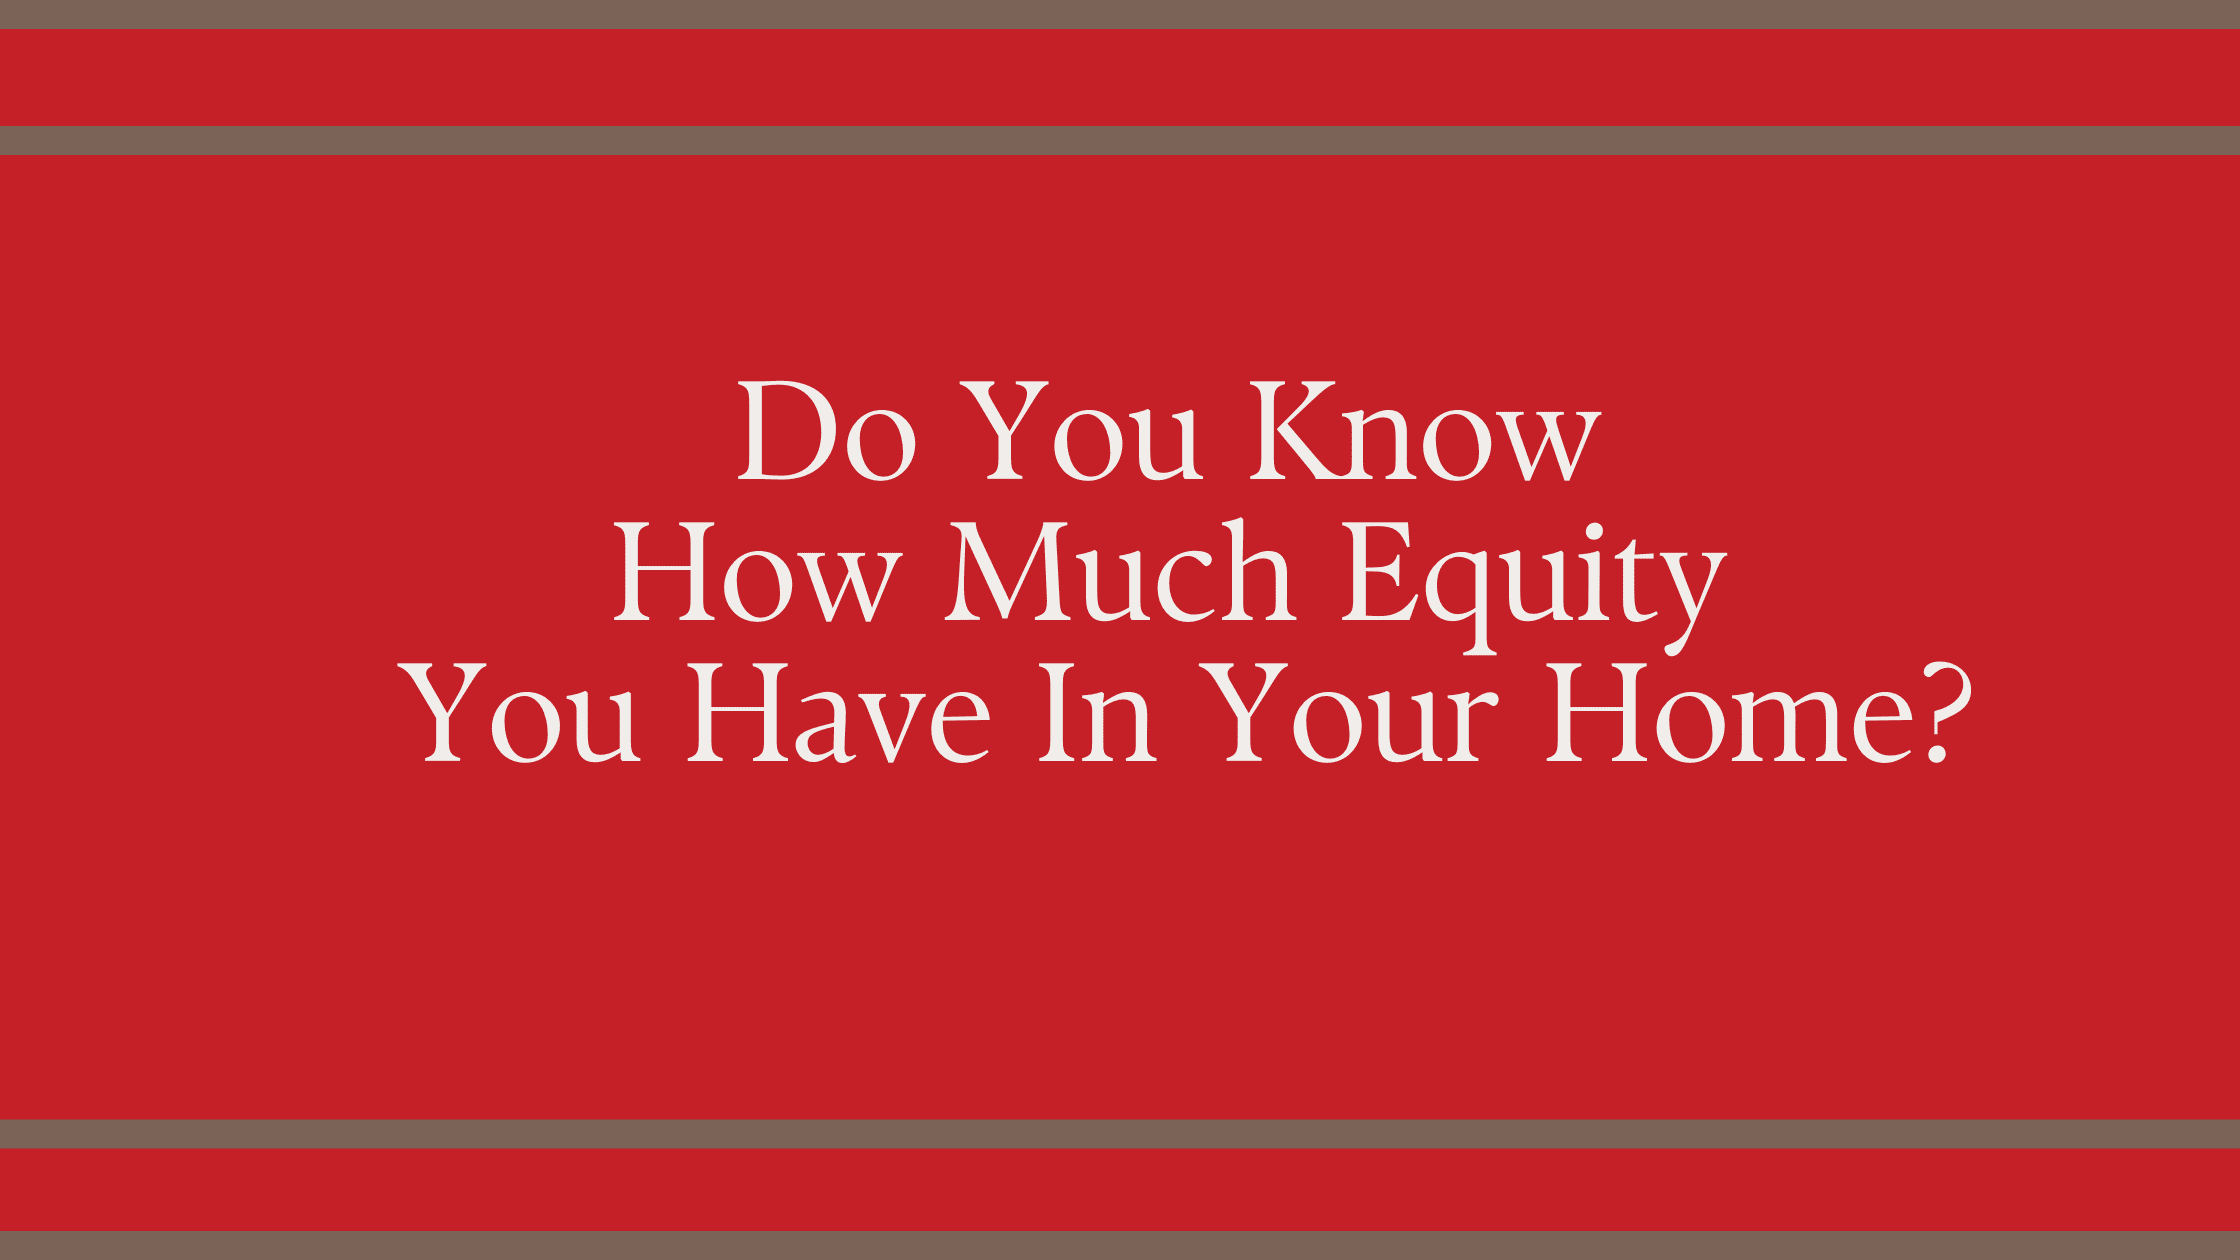 Do you know how much equity you have